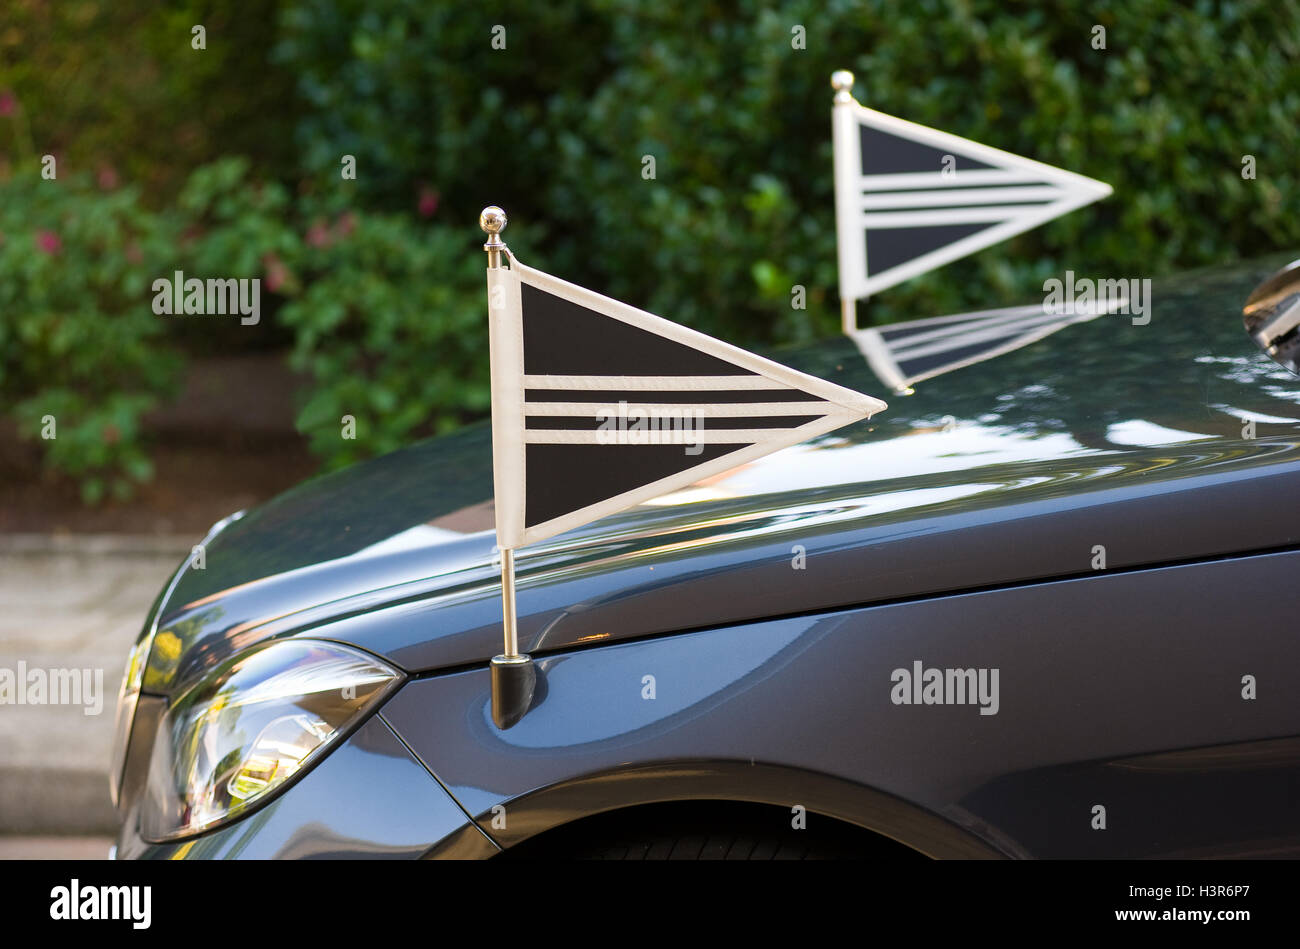 Two little flags on the front of a mourning car Stock Photo